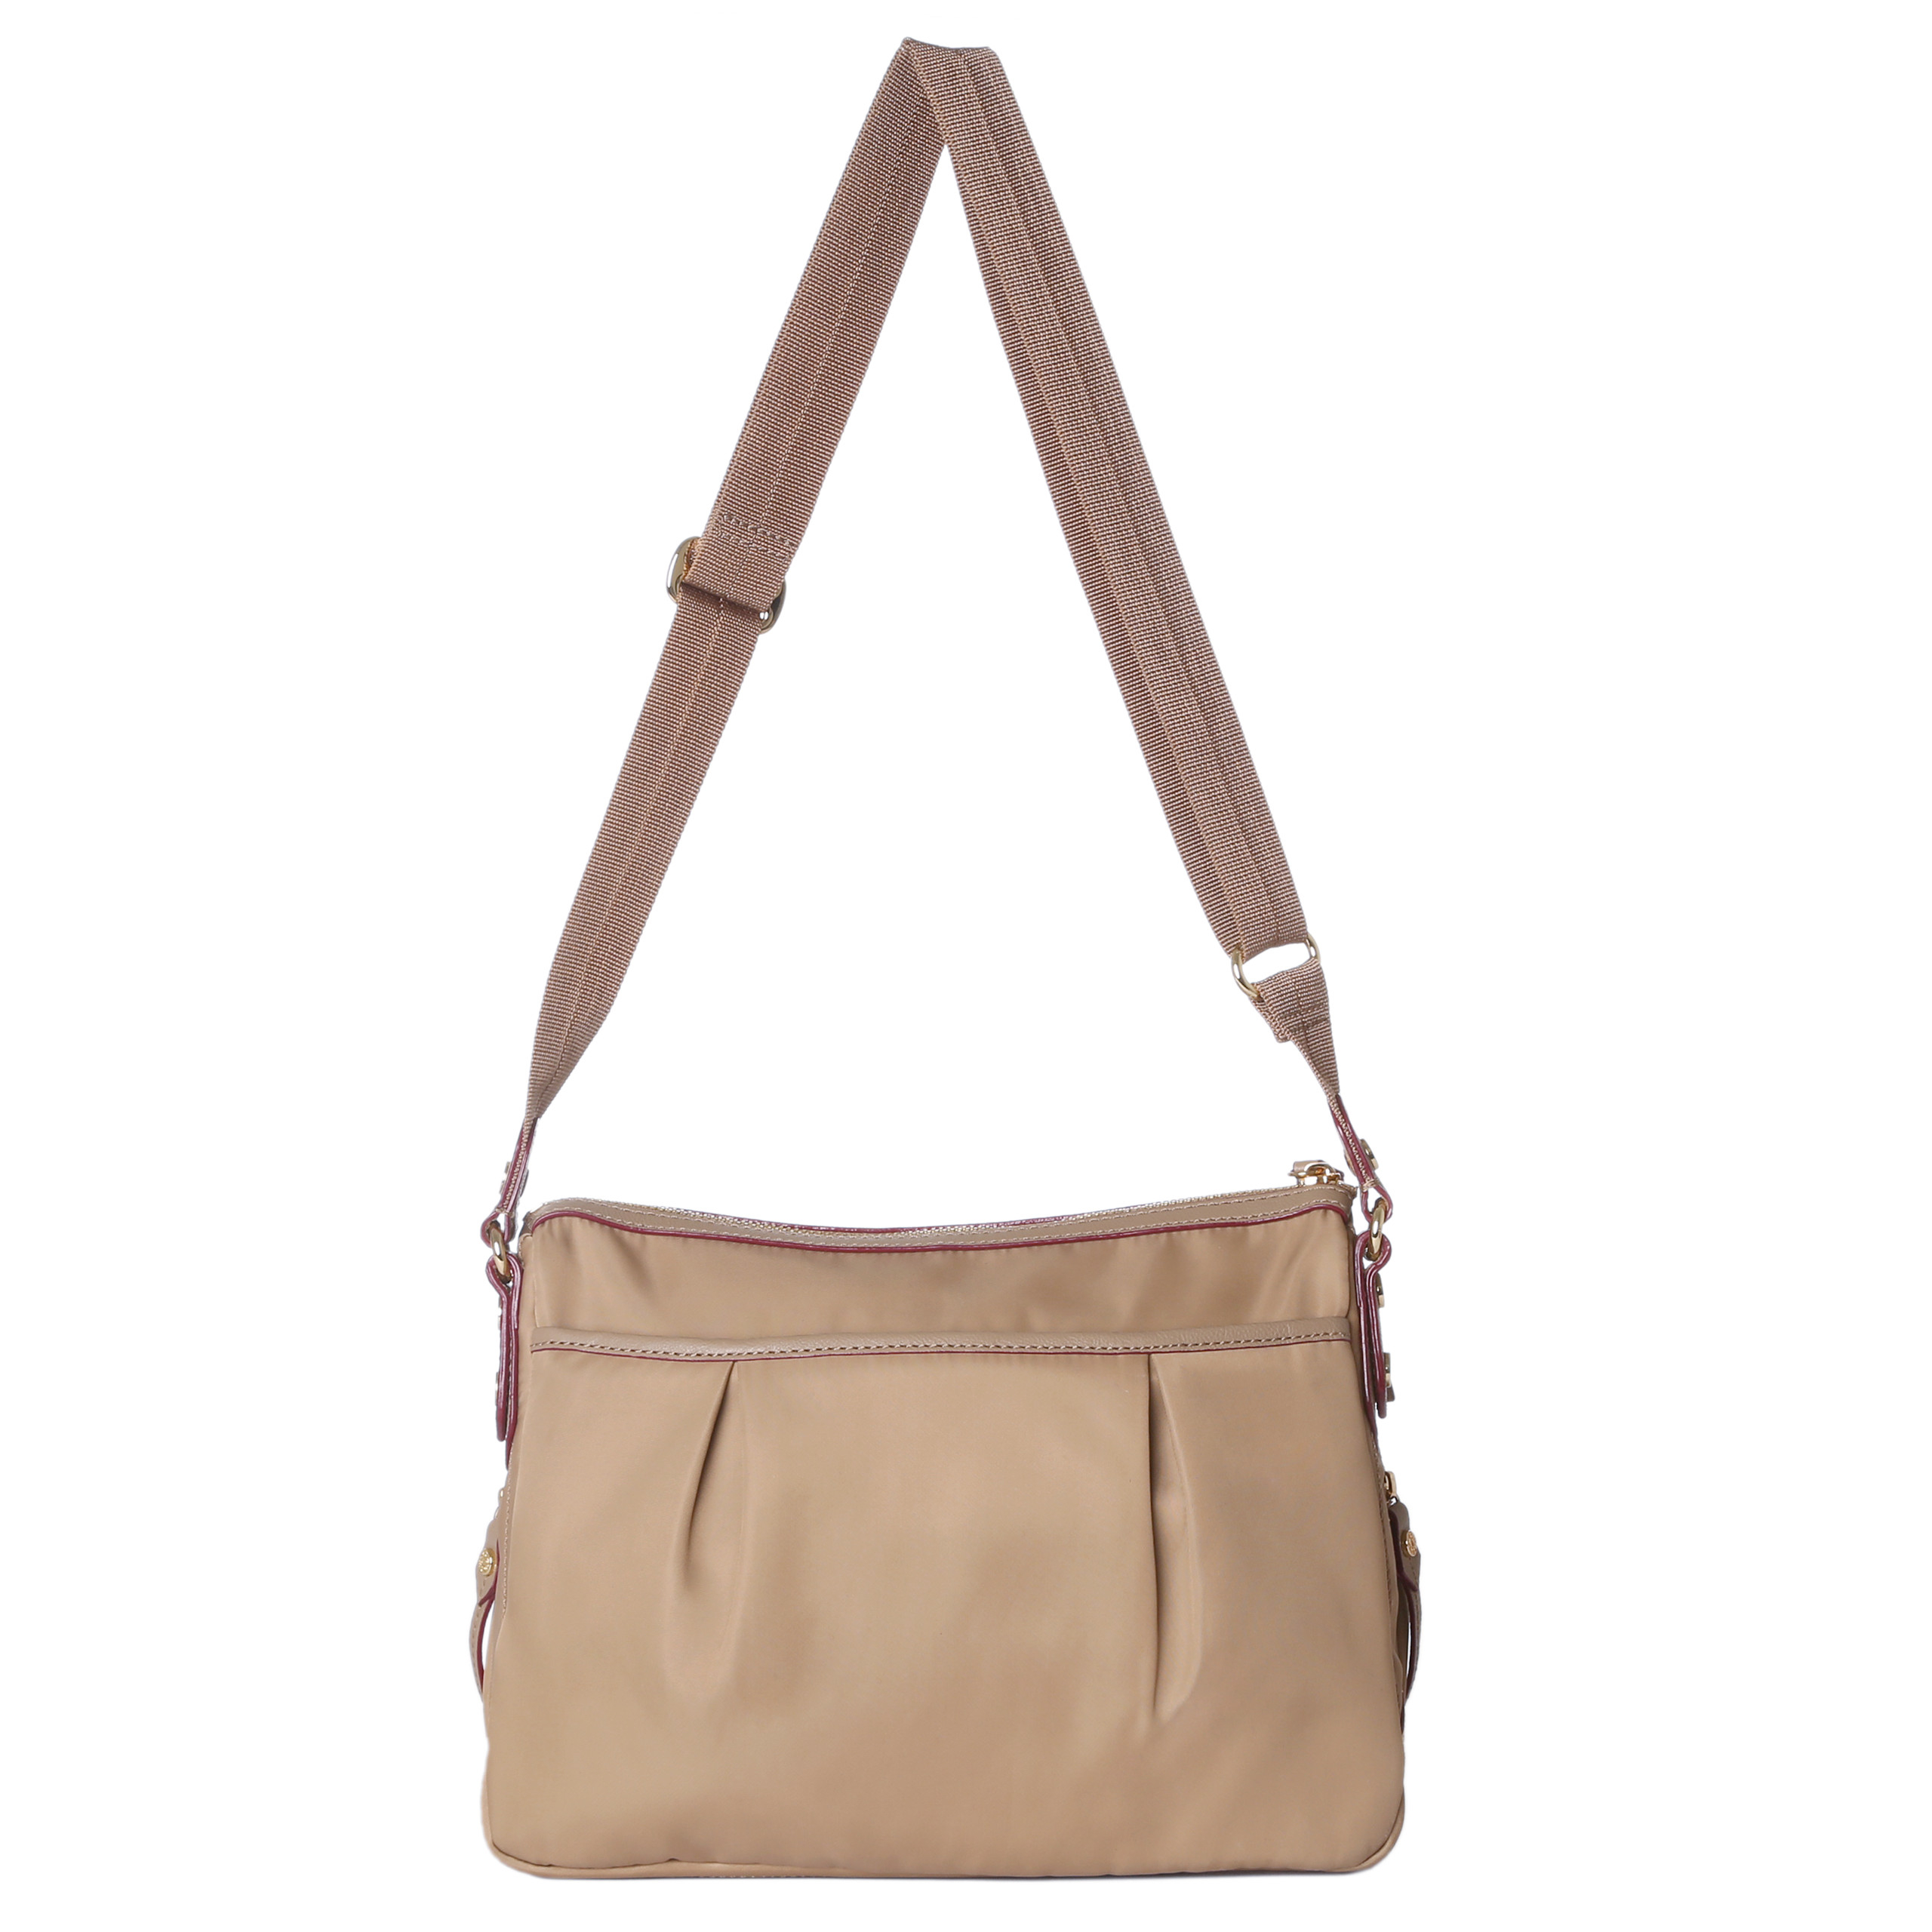 Mz wallace Paige Cardamom Bedford in Natural | Lyst